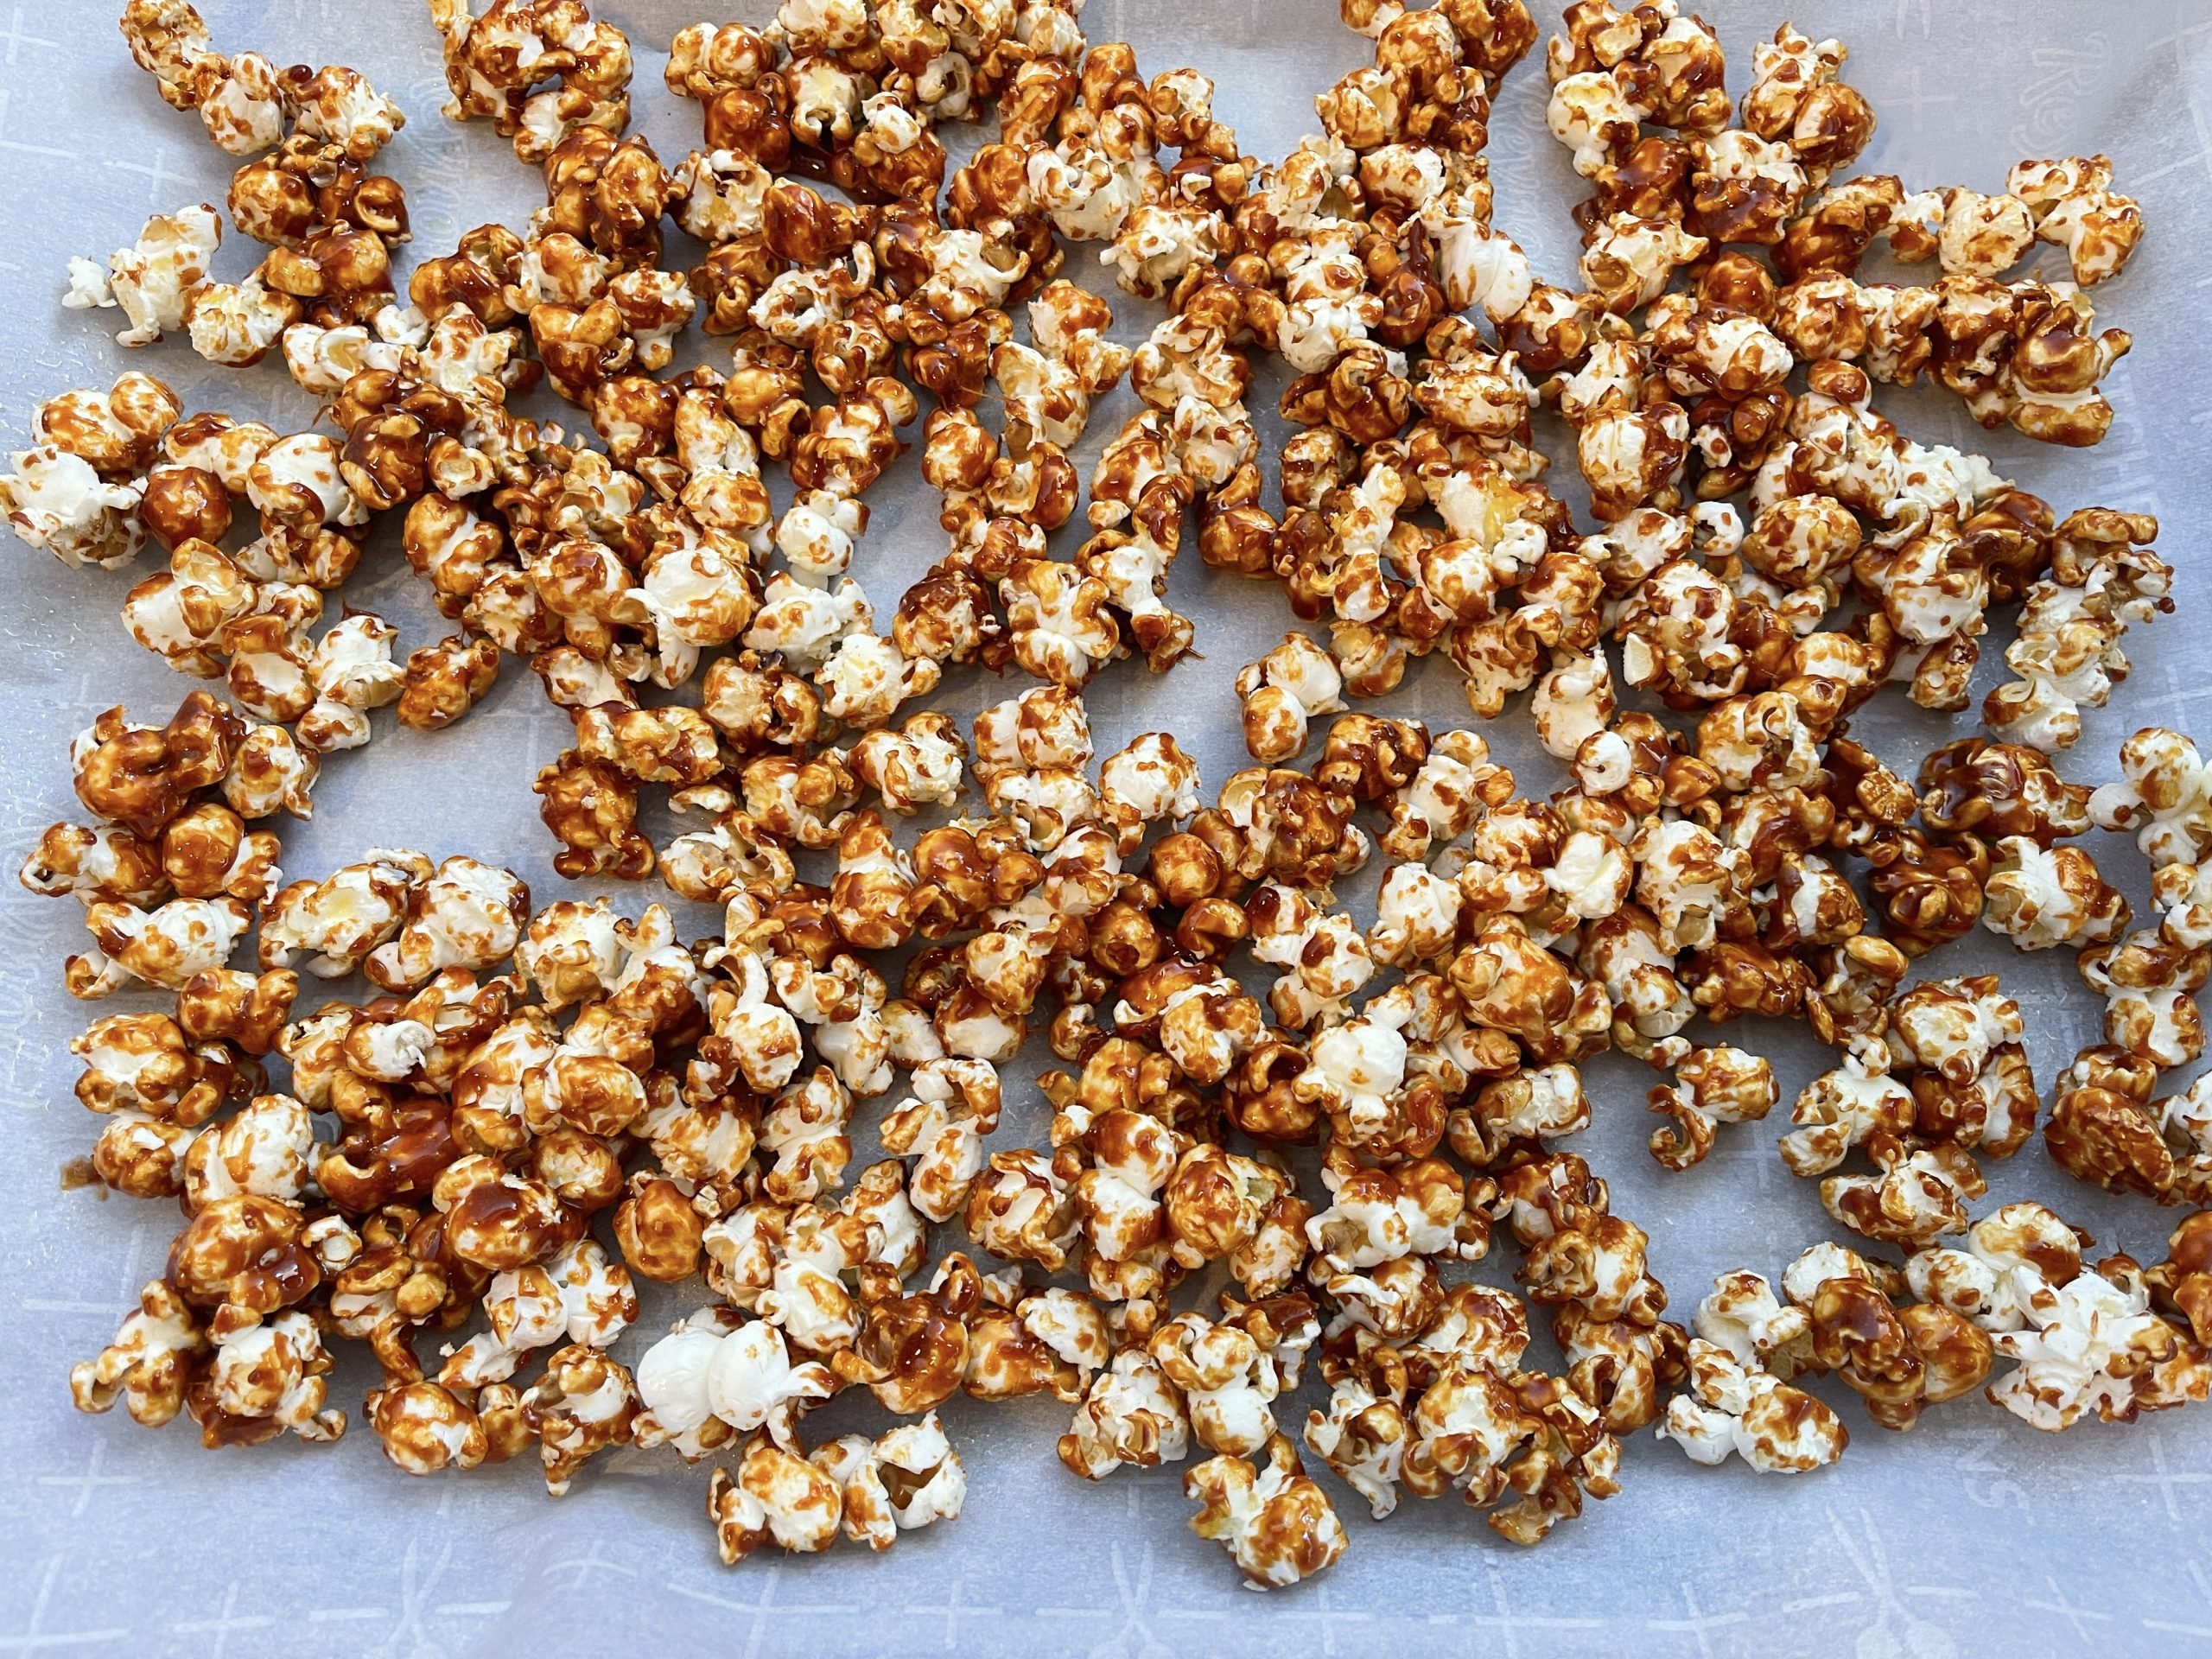 Place popcorn on the parchment-lined baking sheet using a spatula to form a single layer and bake for 15- 20 mins